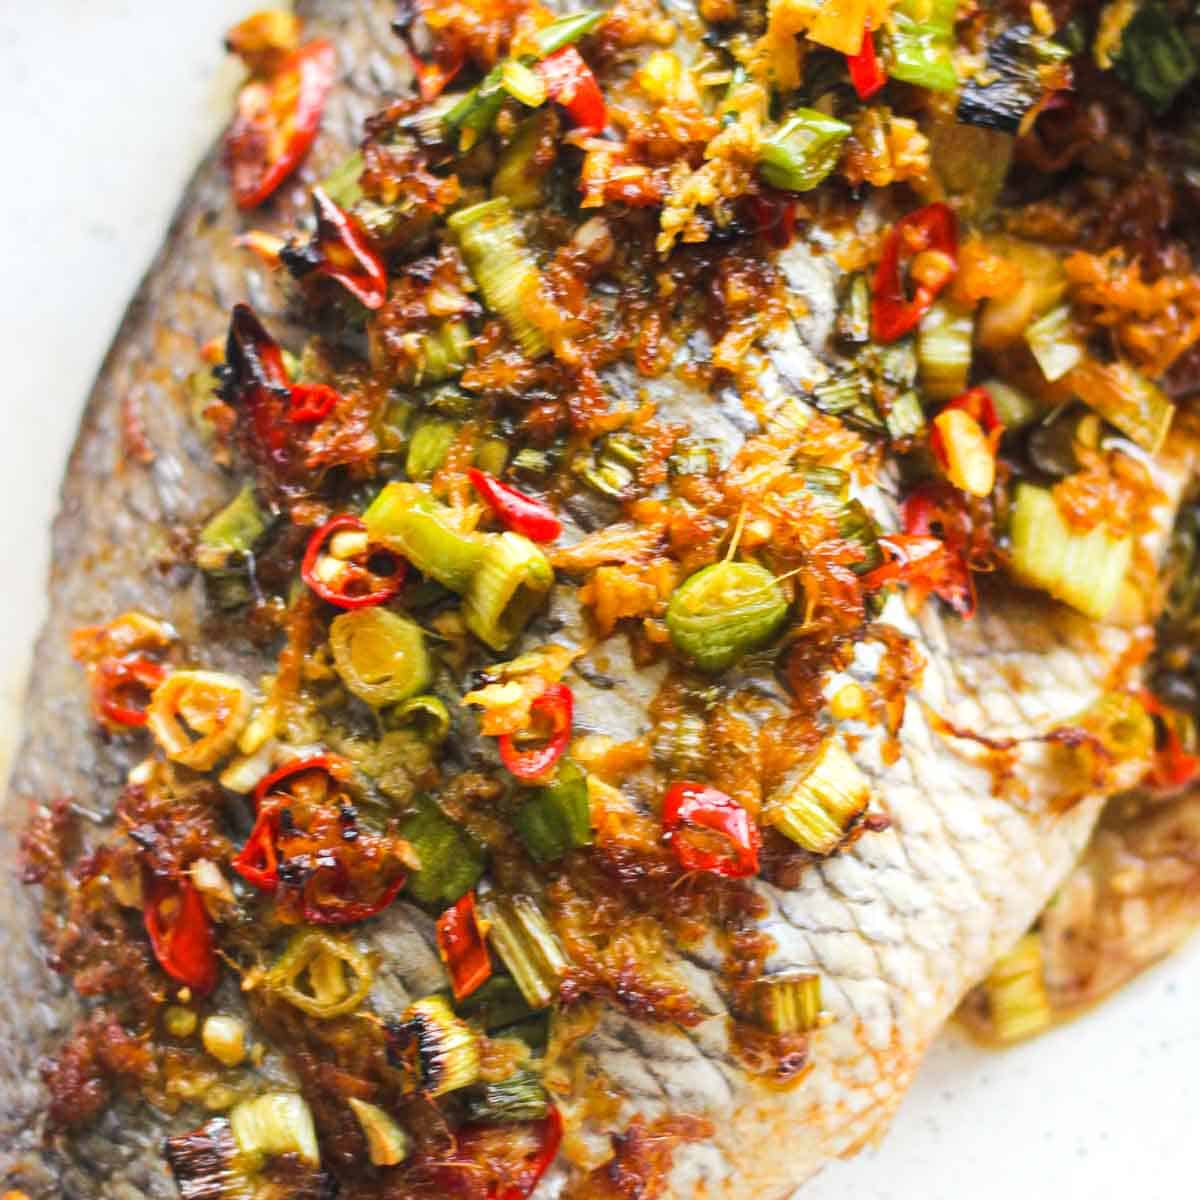 roasted baked porgy with green oinons, ginger and other spices in the baking pan